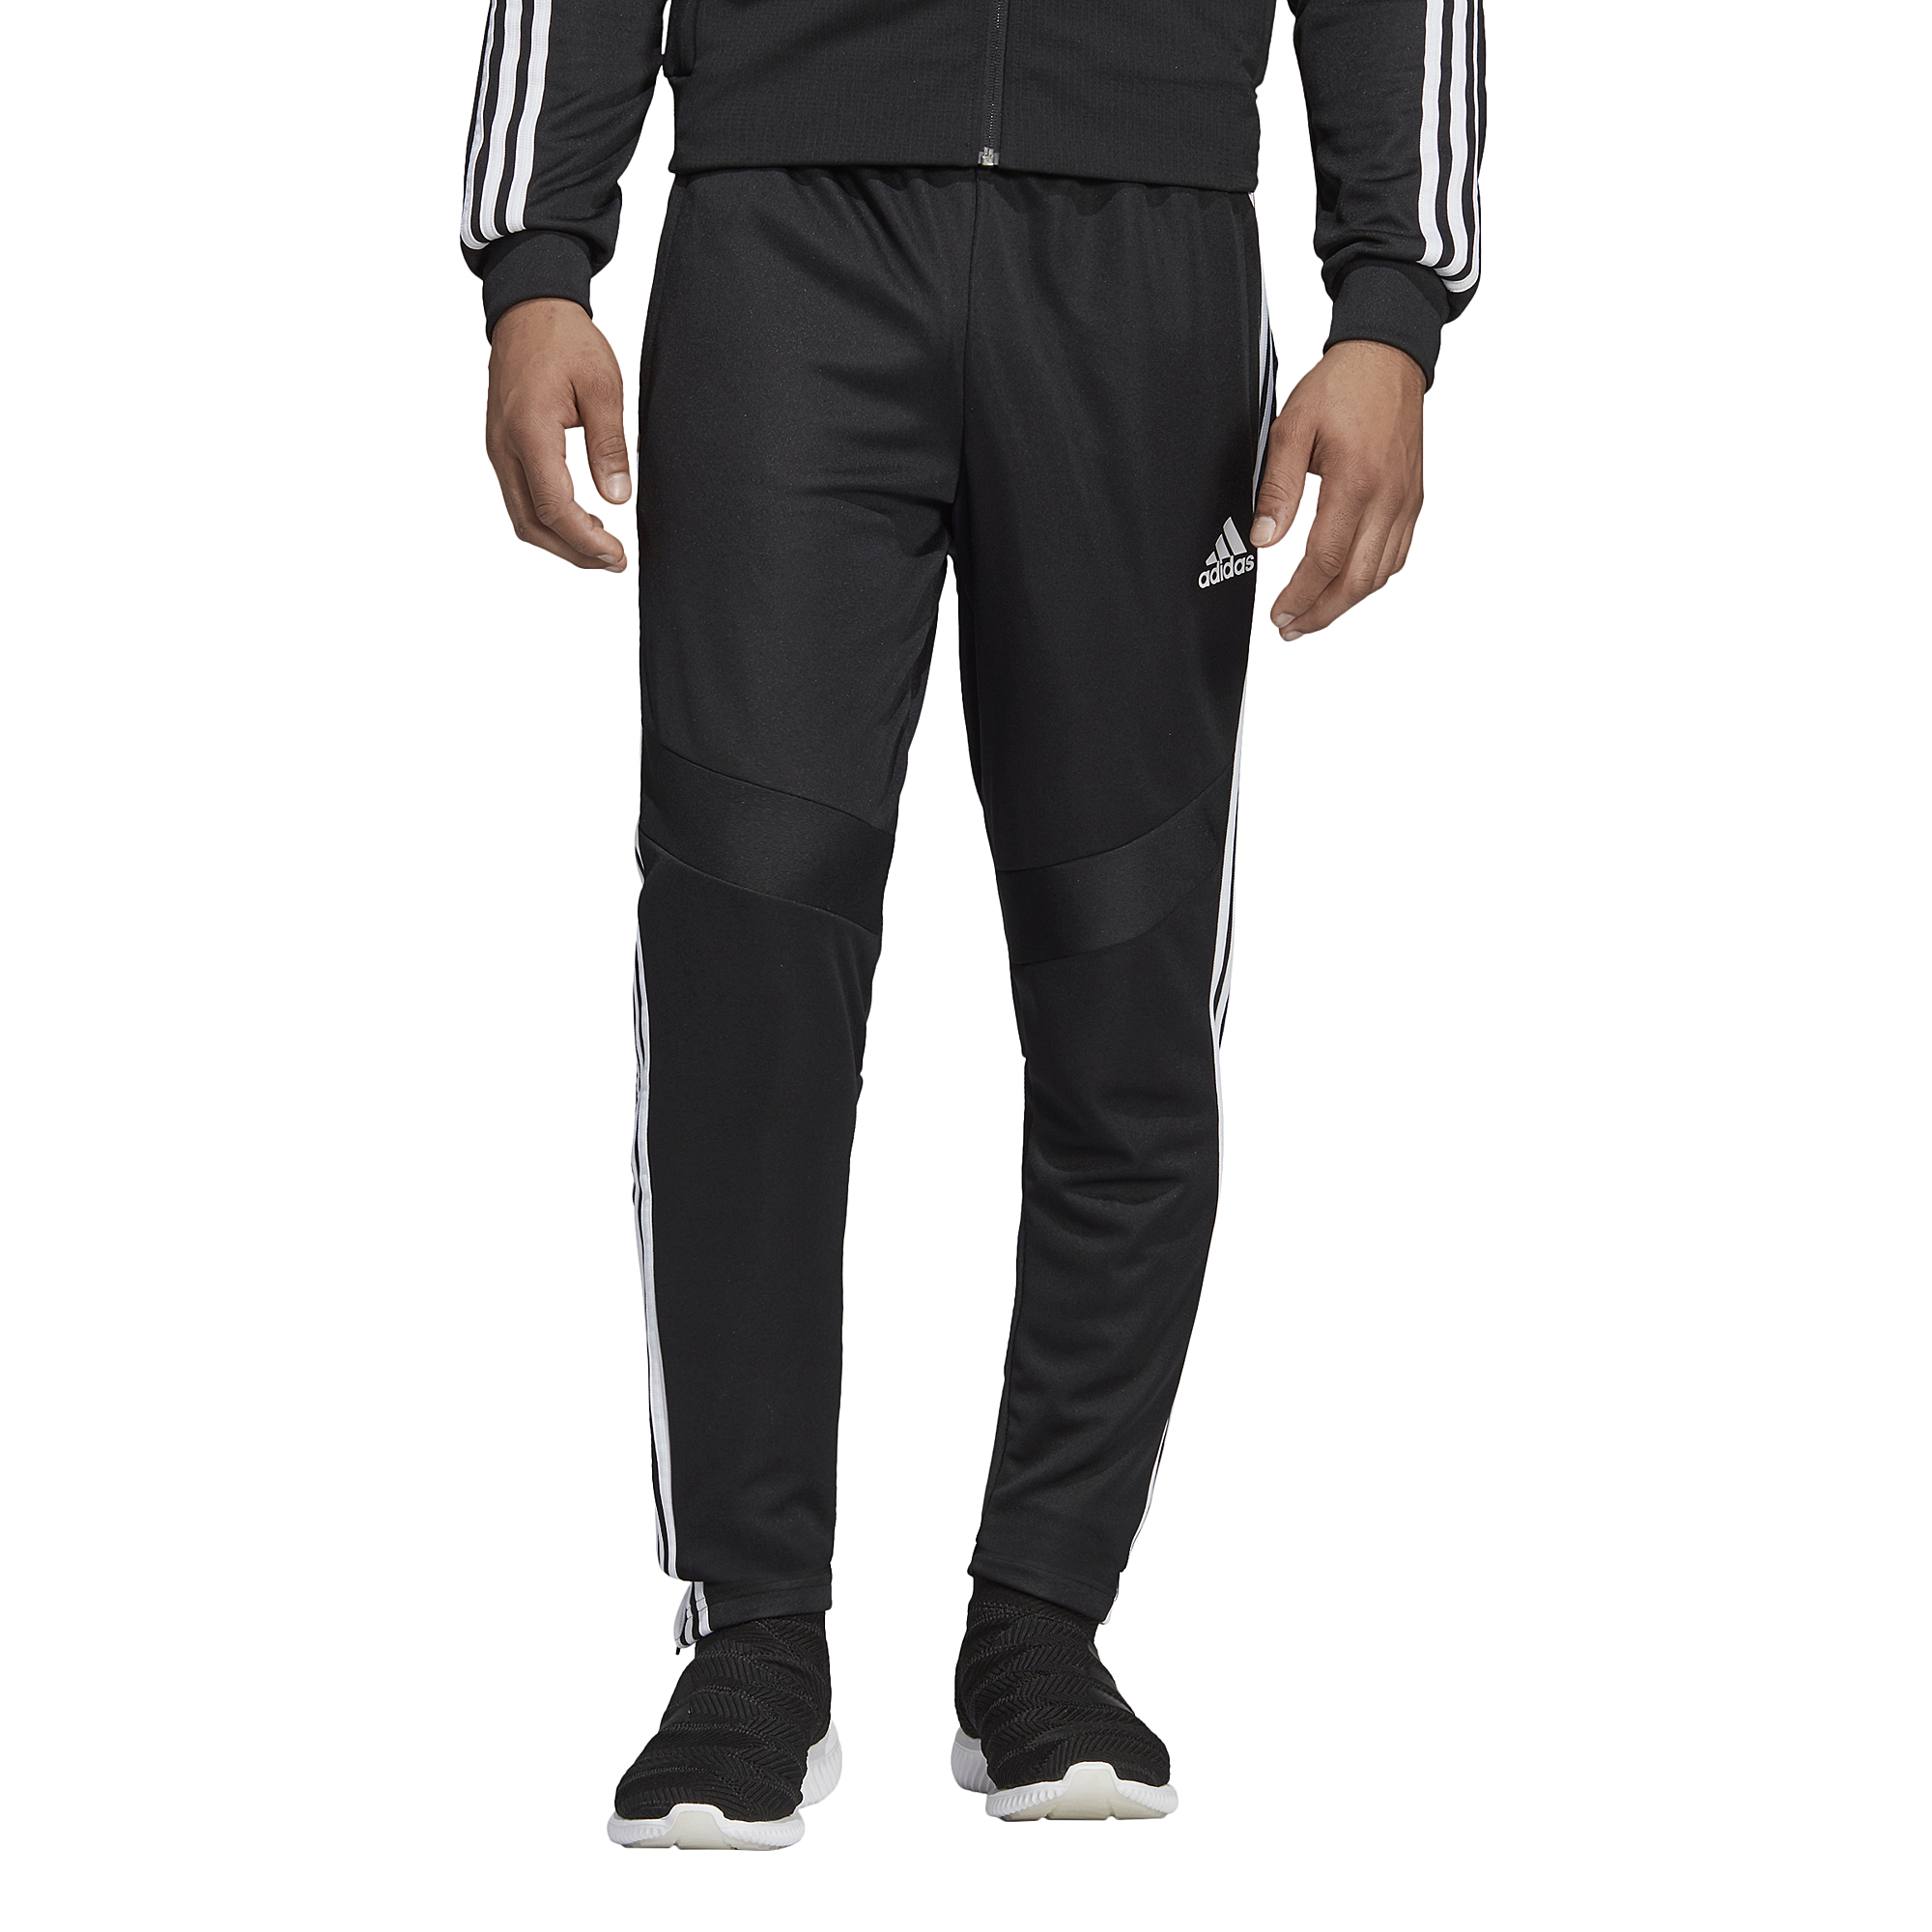 adidas trousers mens sale